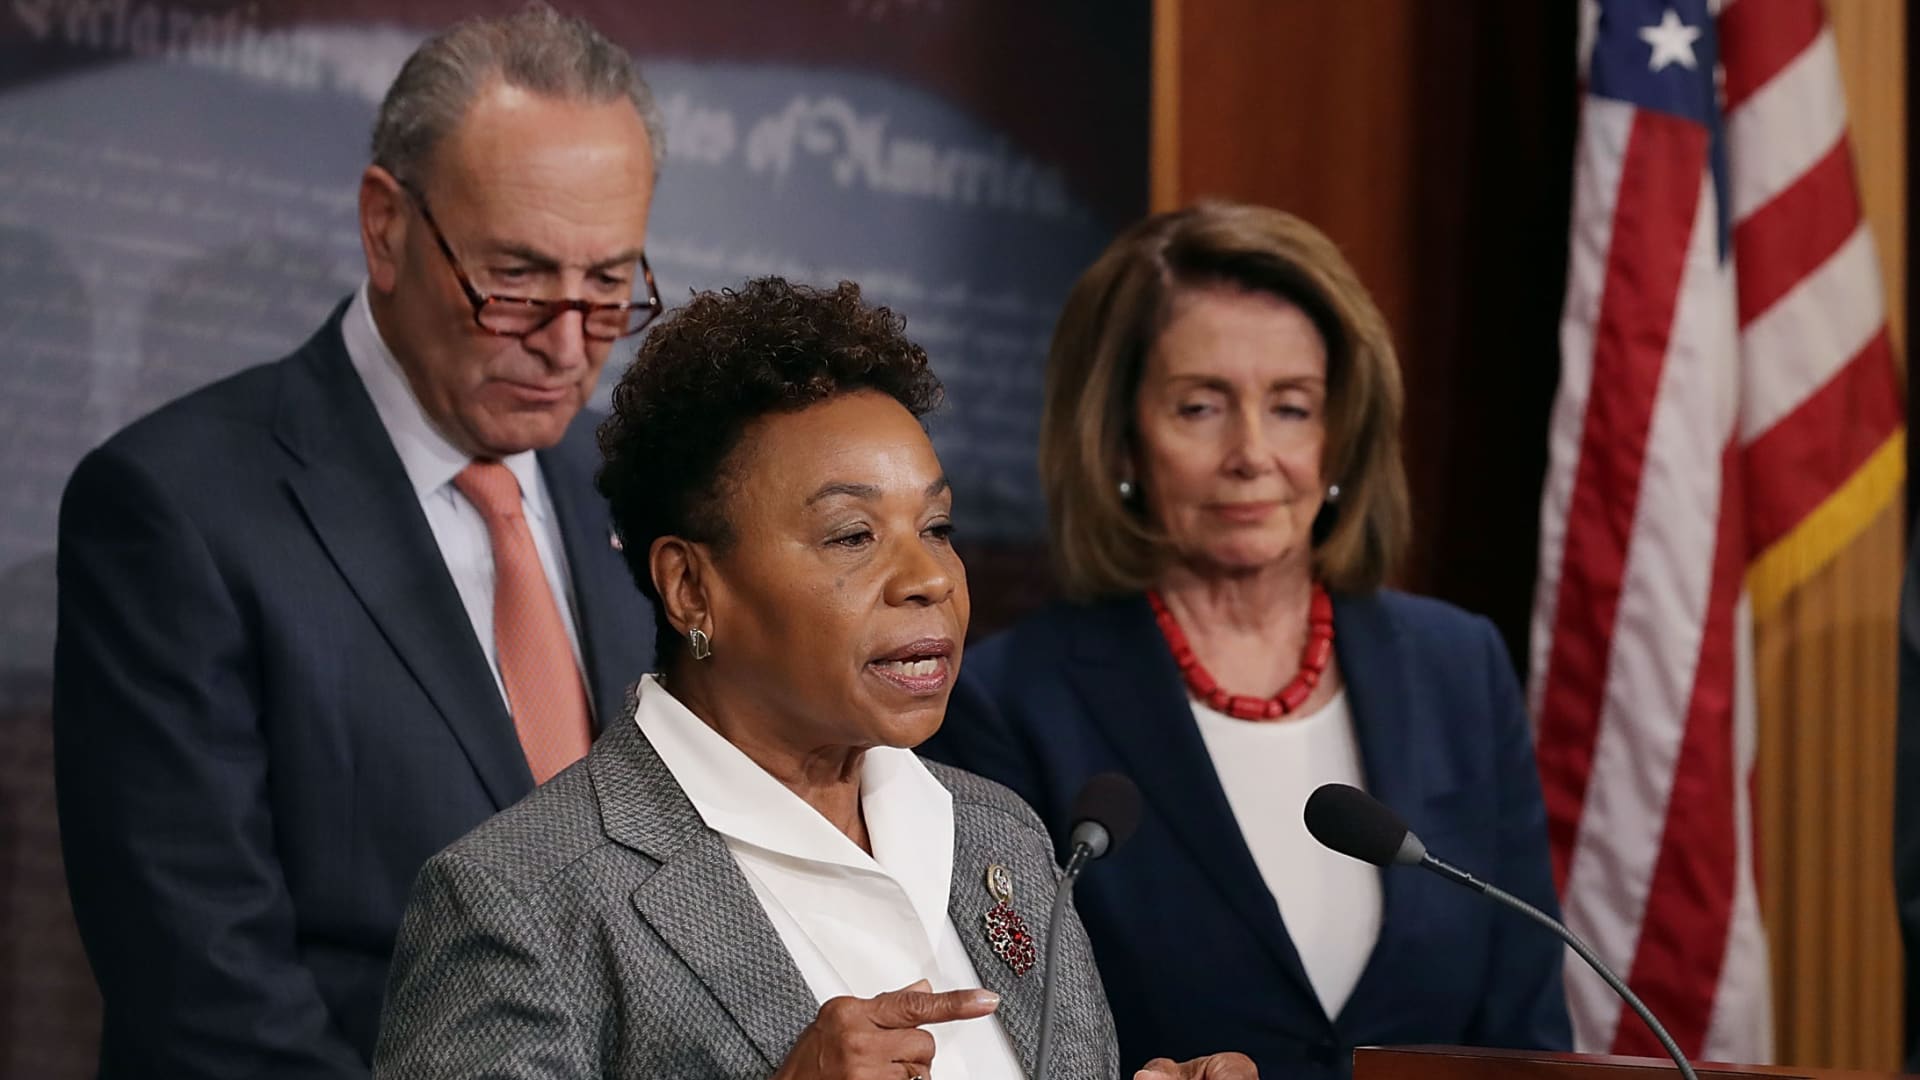 (R) Senate Minority Leader Chuck Schumer (D-NY), Rep. Barbara Lee (D-CA), House Minority Leader Nancy Pelosi (D-CA) hold a news conference critical at the U.S. Capitol October 4, 2017 in Washington, DC.